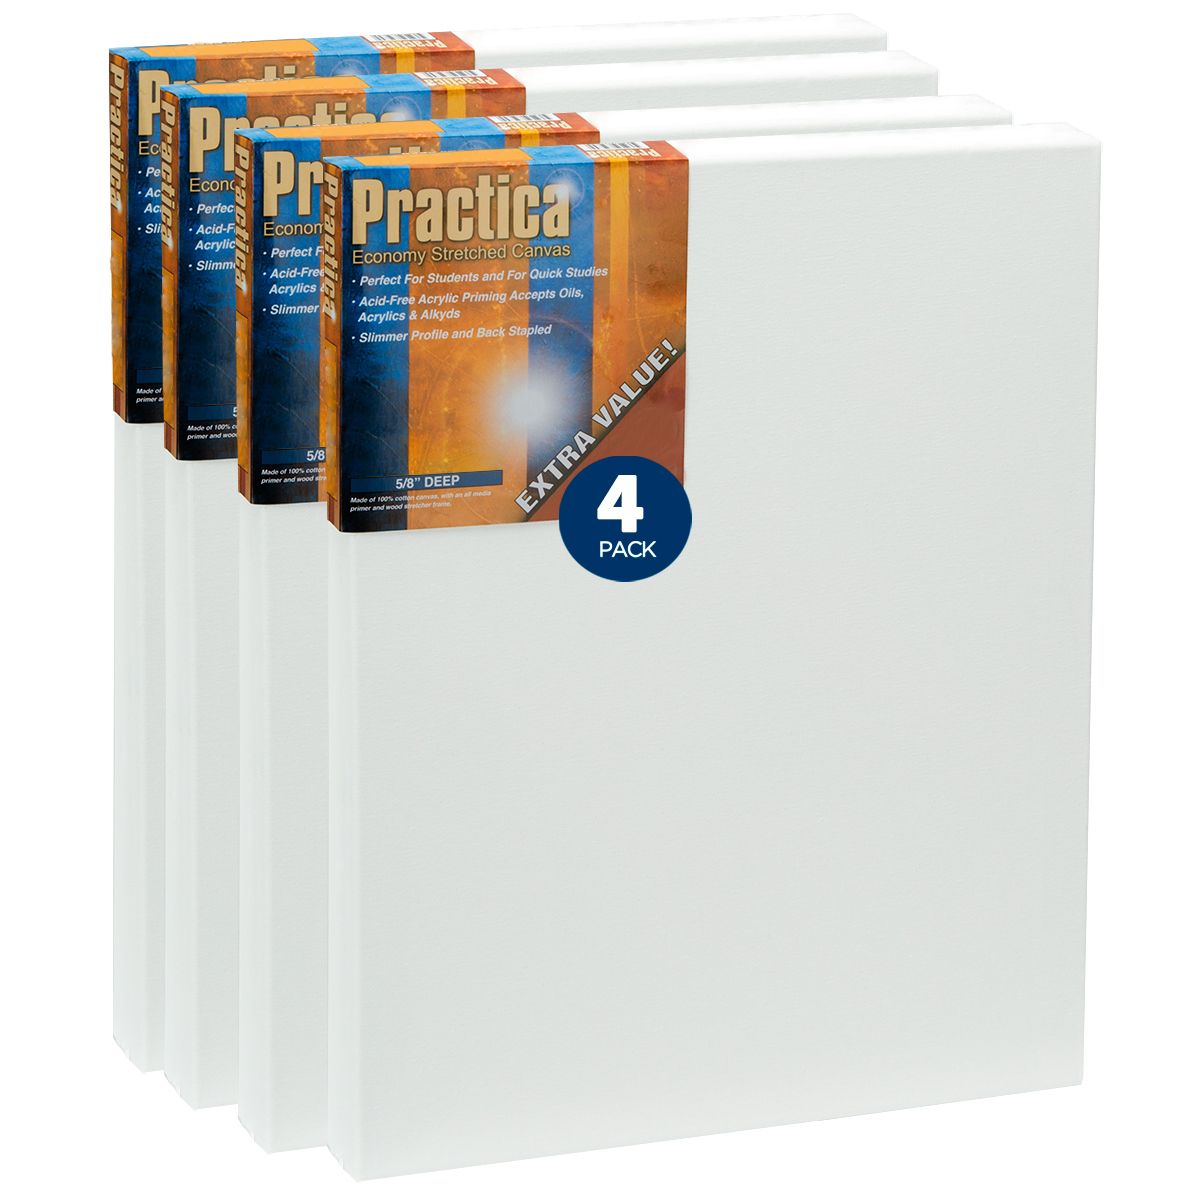 Stretched Cotton Canvas 11"x14", Value Pack of 4, Practica